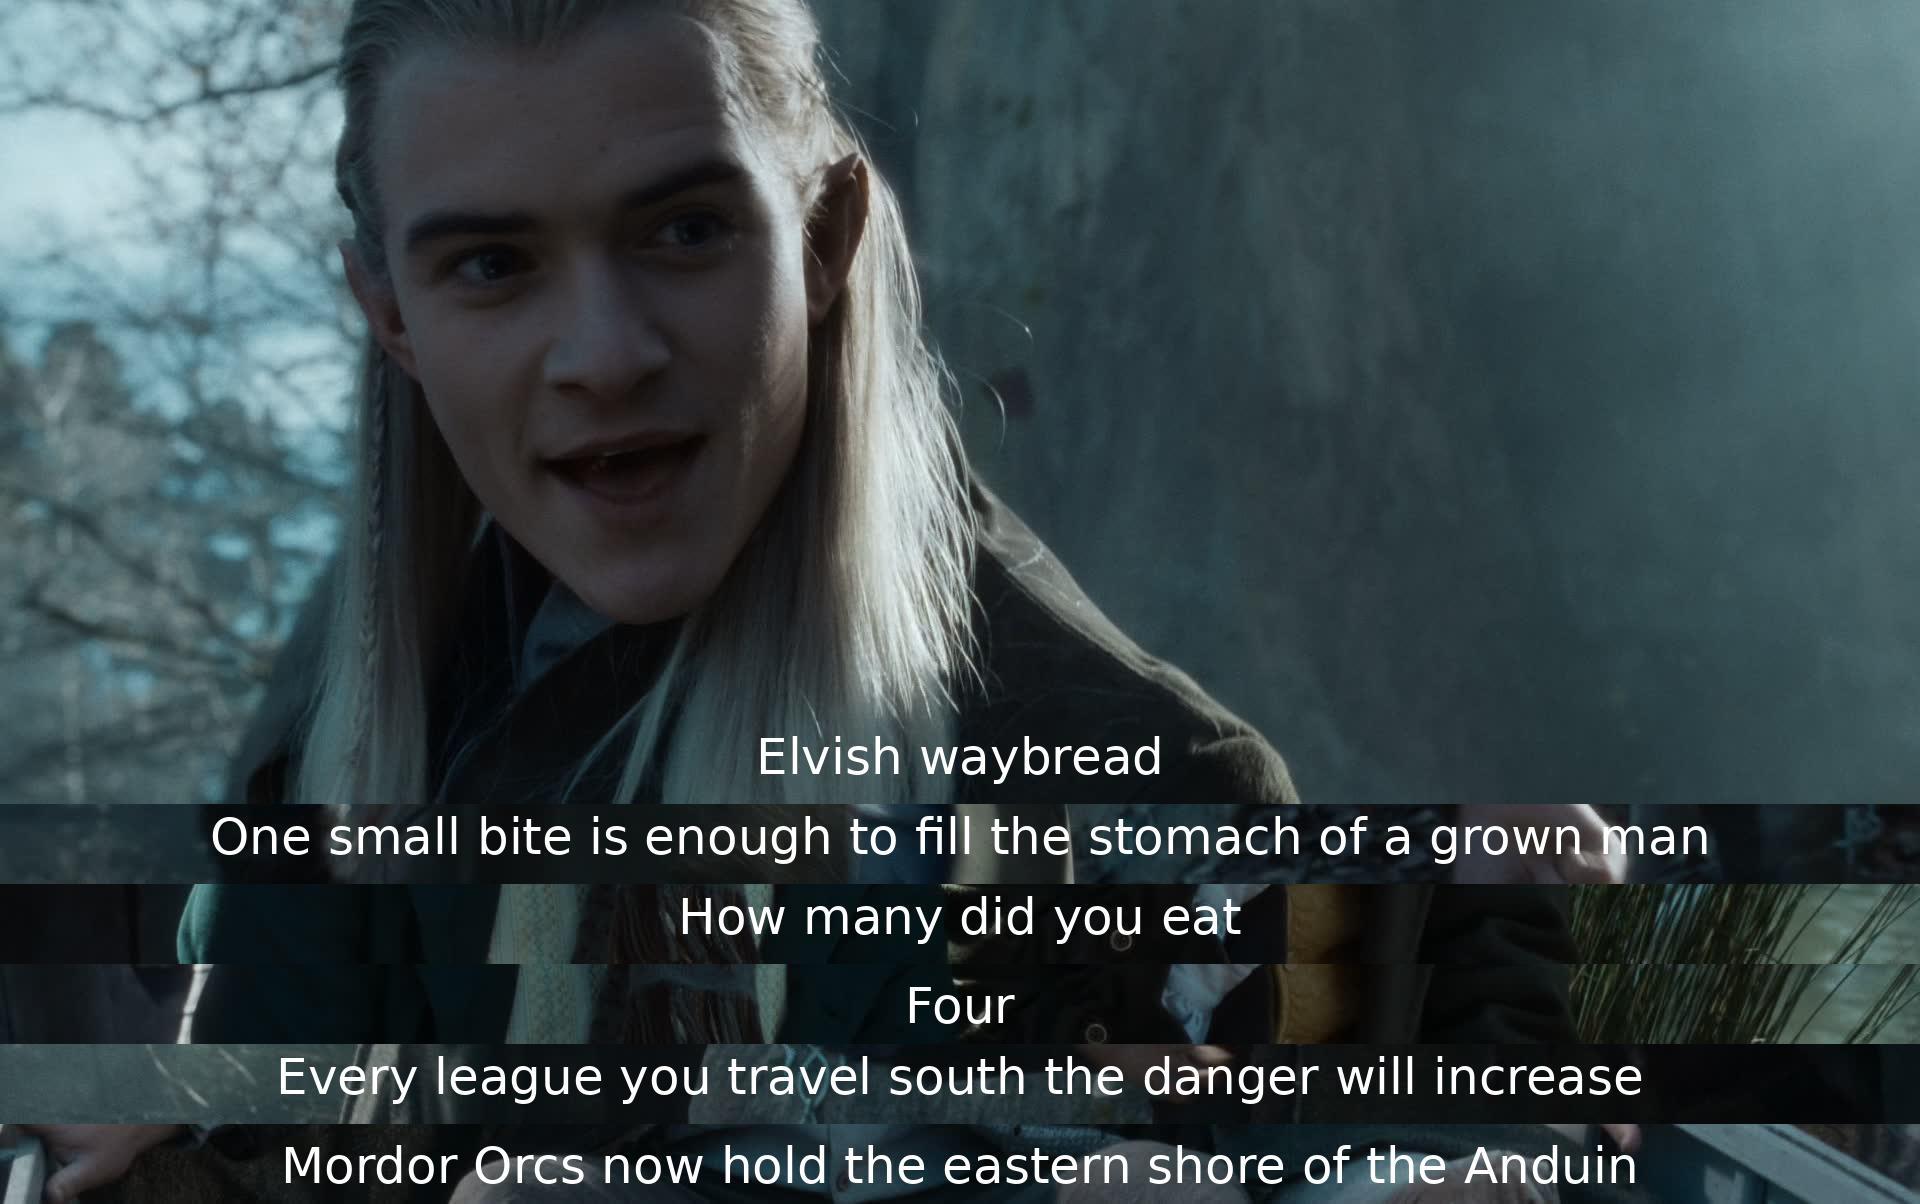 A character offers Elvish waybread that can fill a grown man's stomach with just one bite. Despite eating four, they discuss the increasing danger on their journey south, with Mordor Orcs now occupying the eastern shore of the Anduin River.